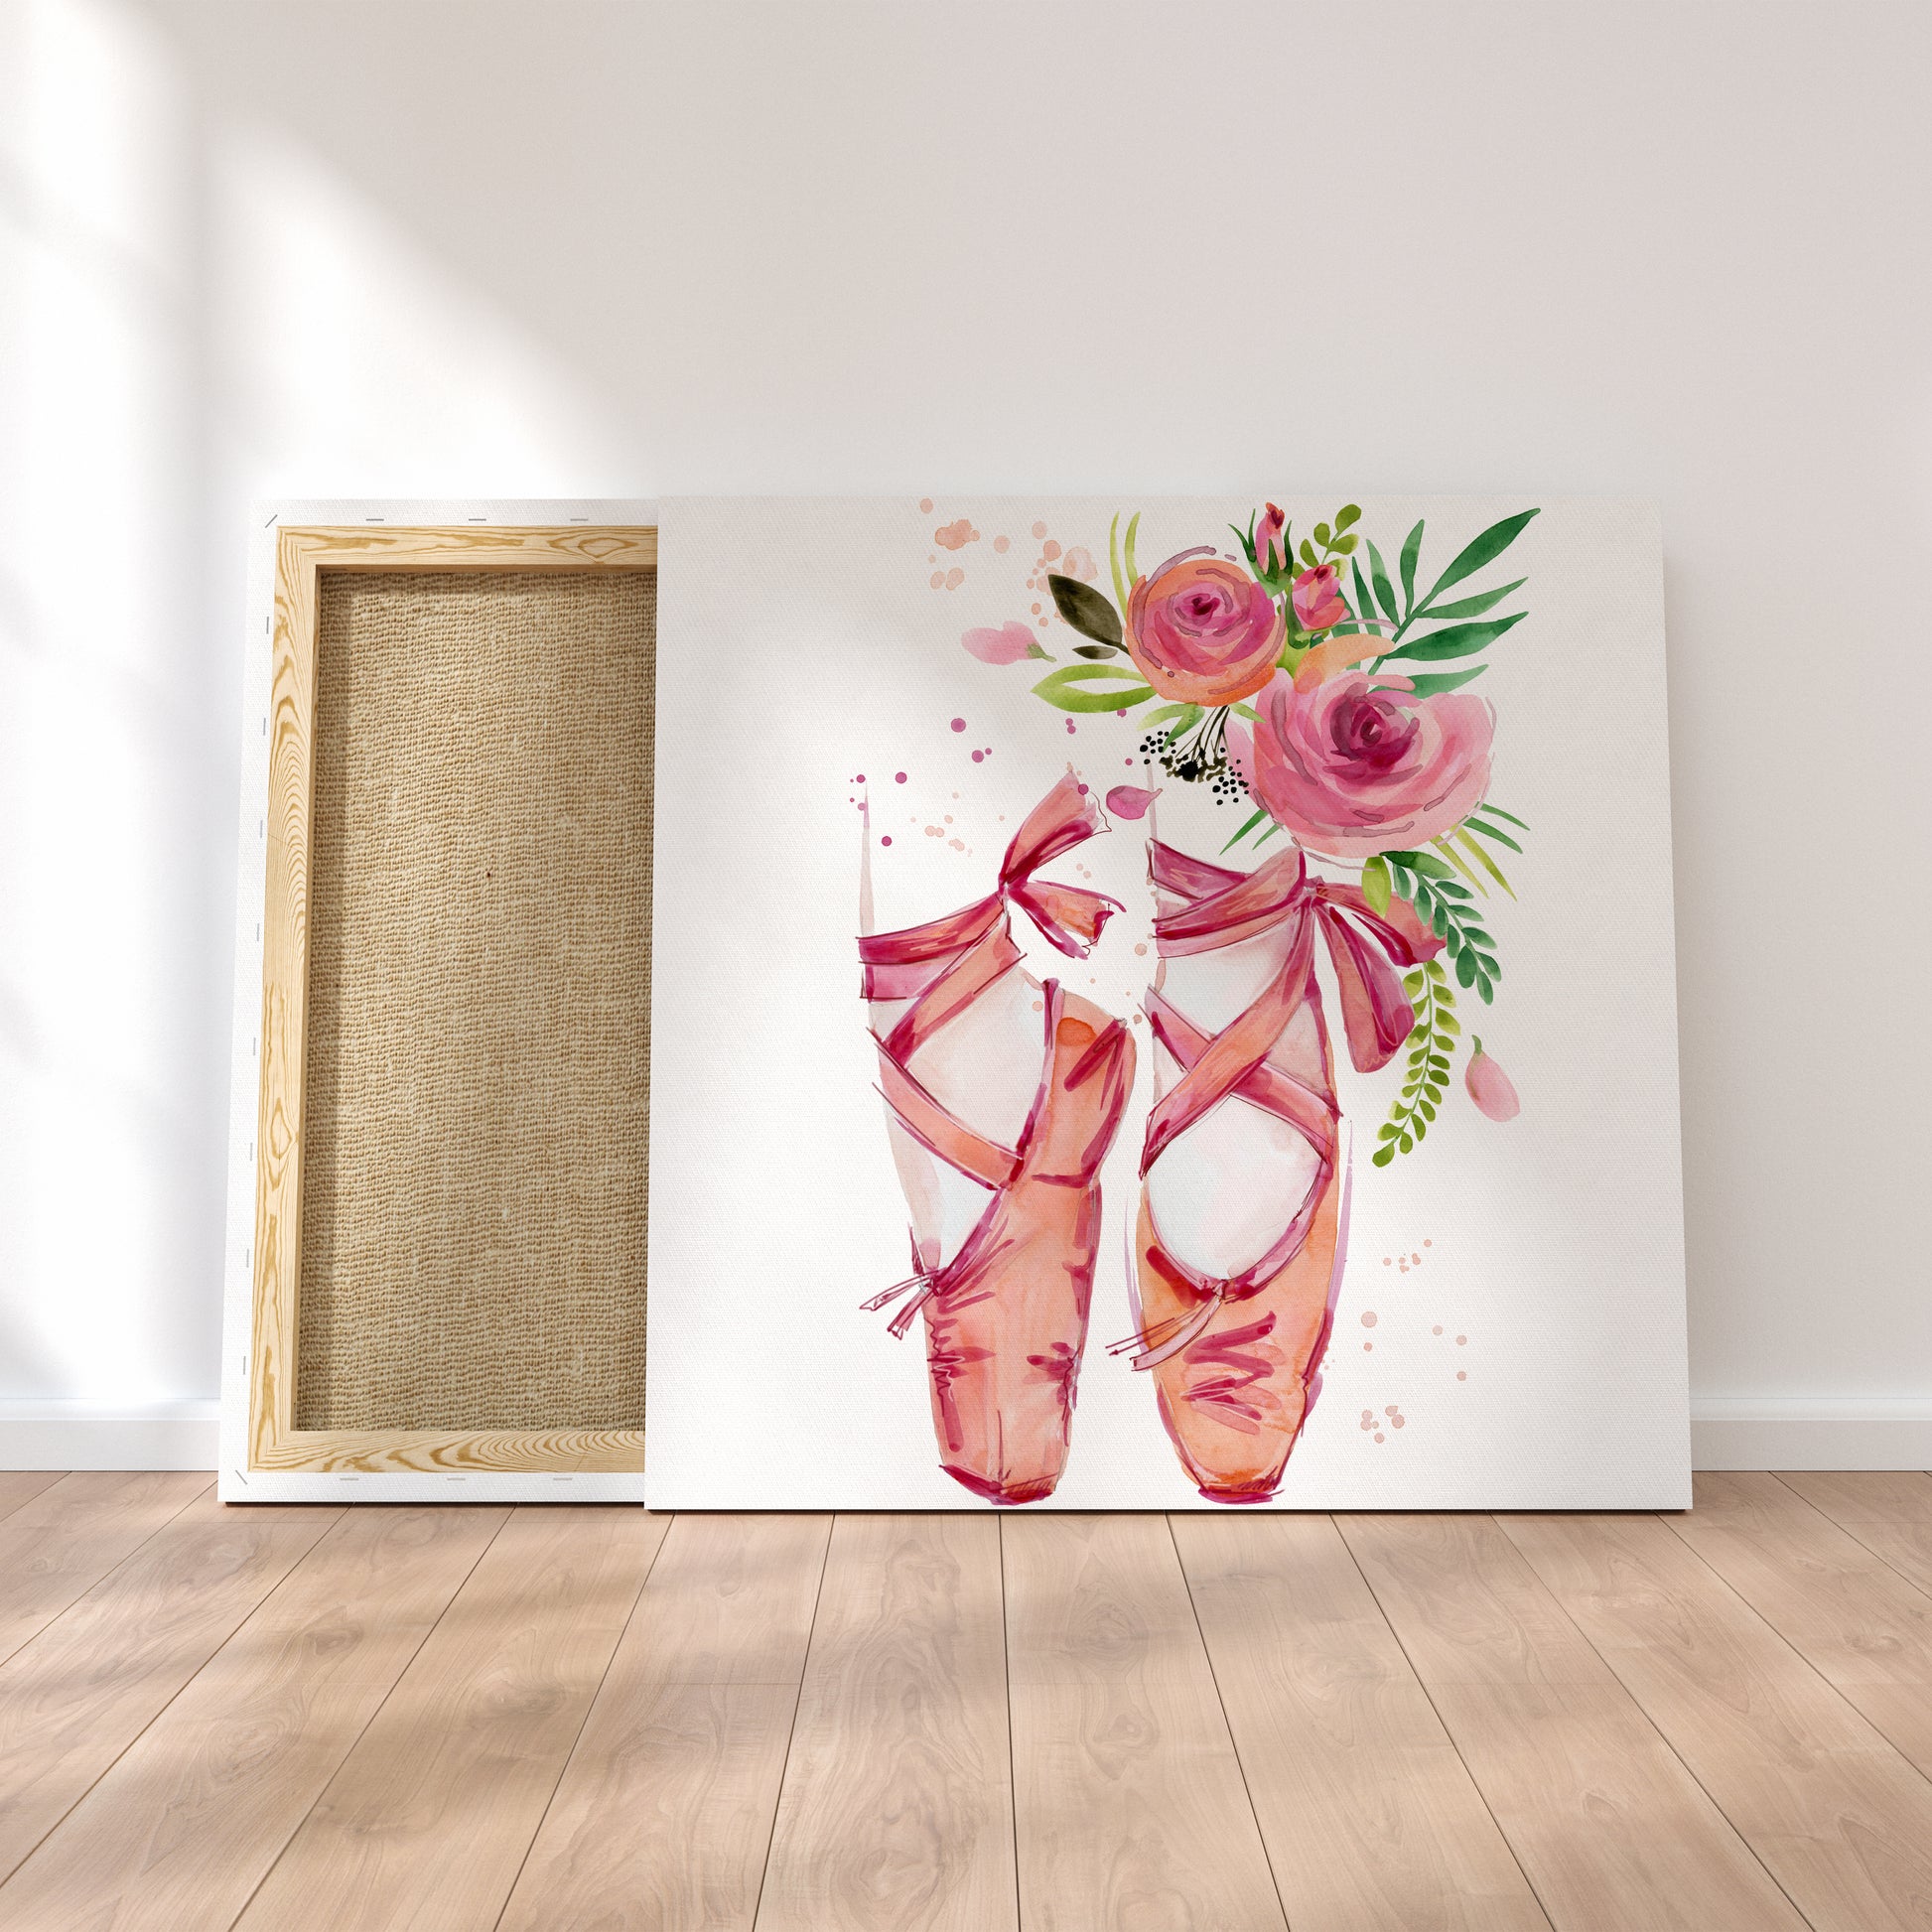 Ballet Shoes and Roses Canvas Print ArtLexy 1 Panel 12"x12" inches 